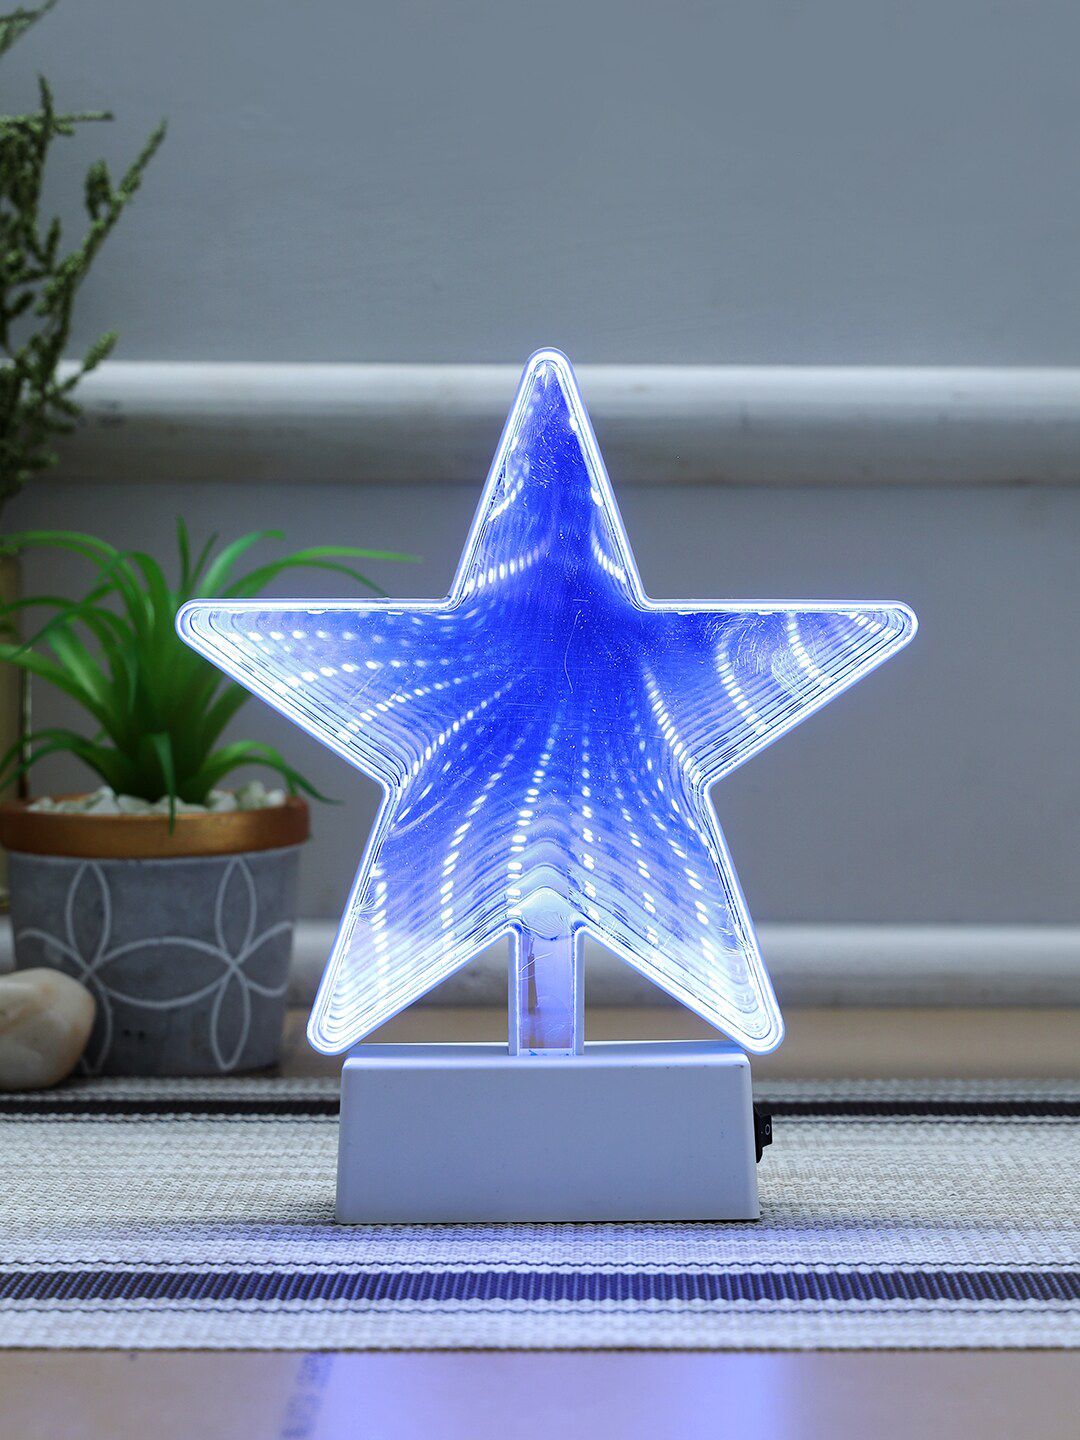 TAYHAA Blue Star-Shaped LED Lighting with Mirror Price in India